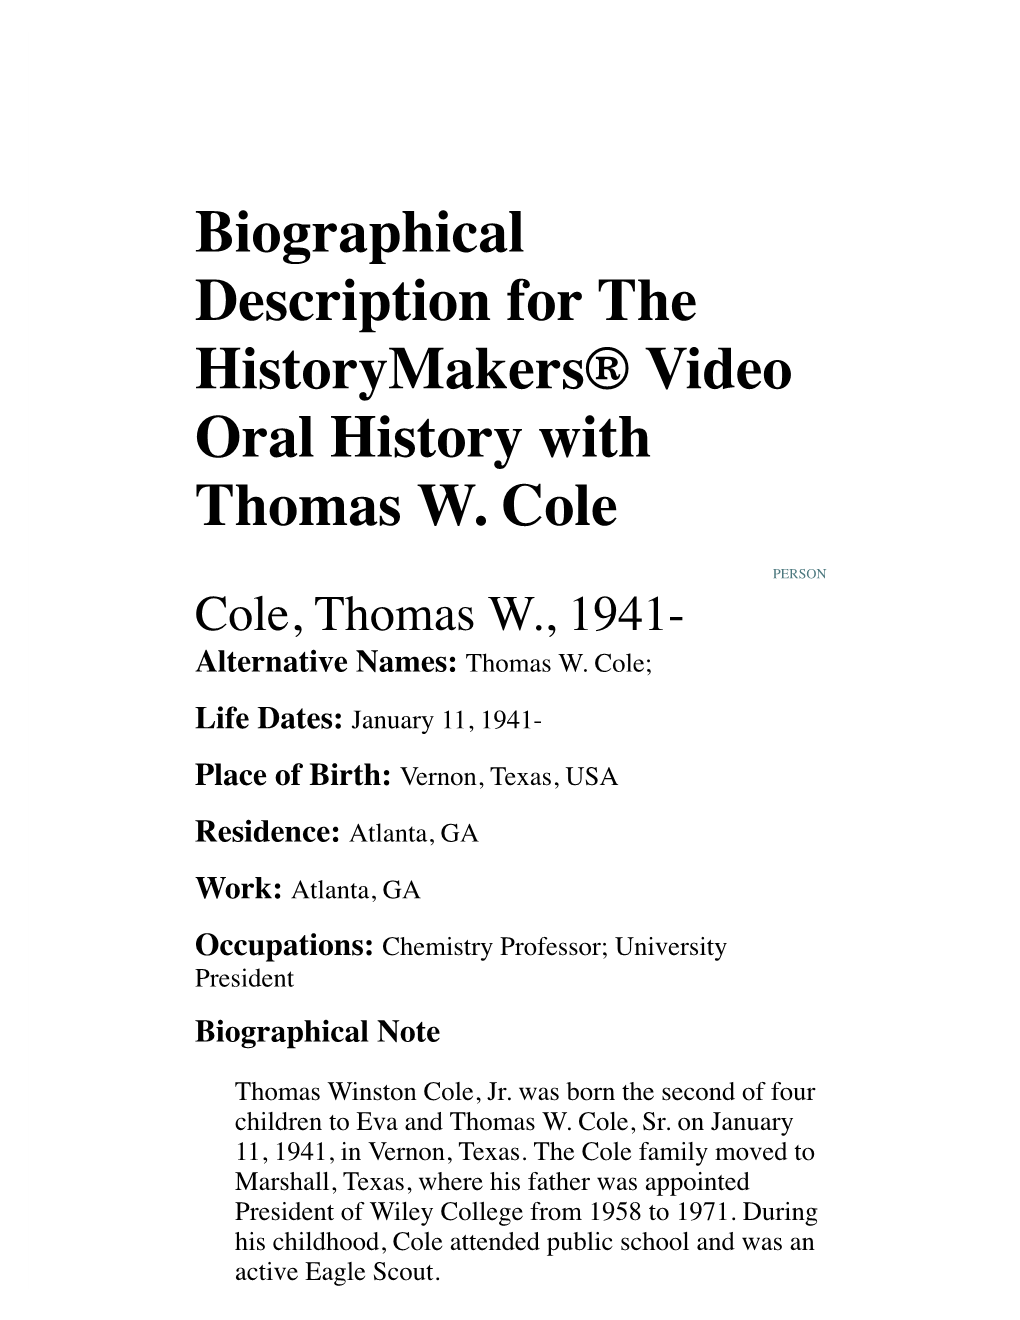 Biographical Description for the Historymakers® Video Oral History with Thomas W